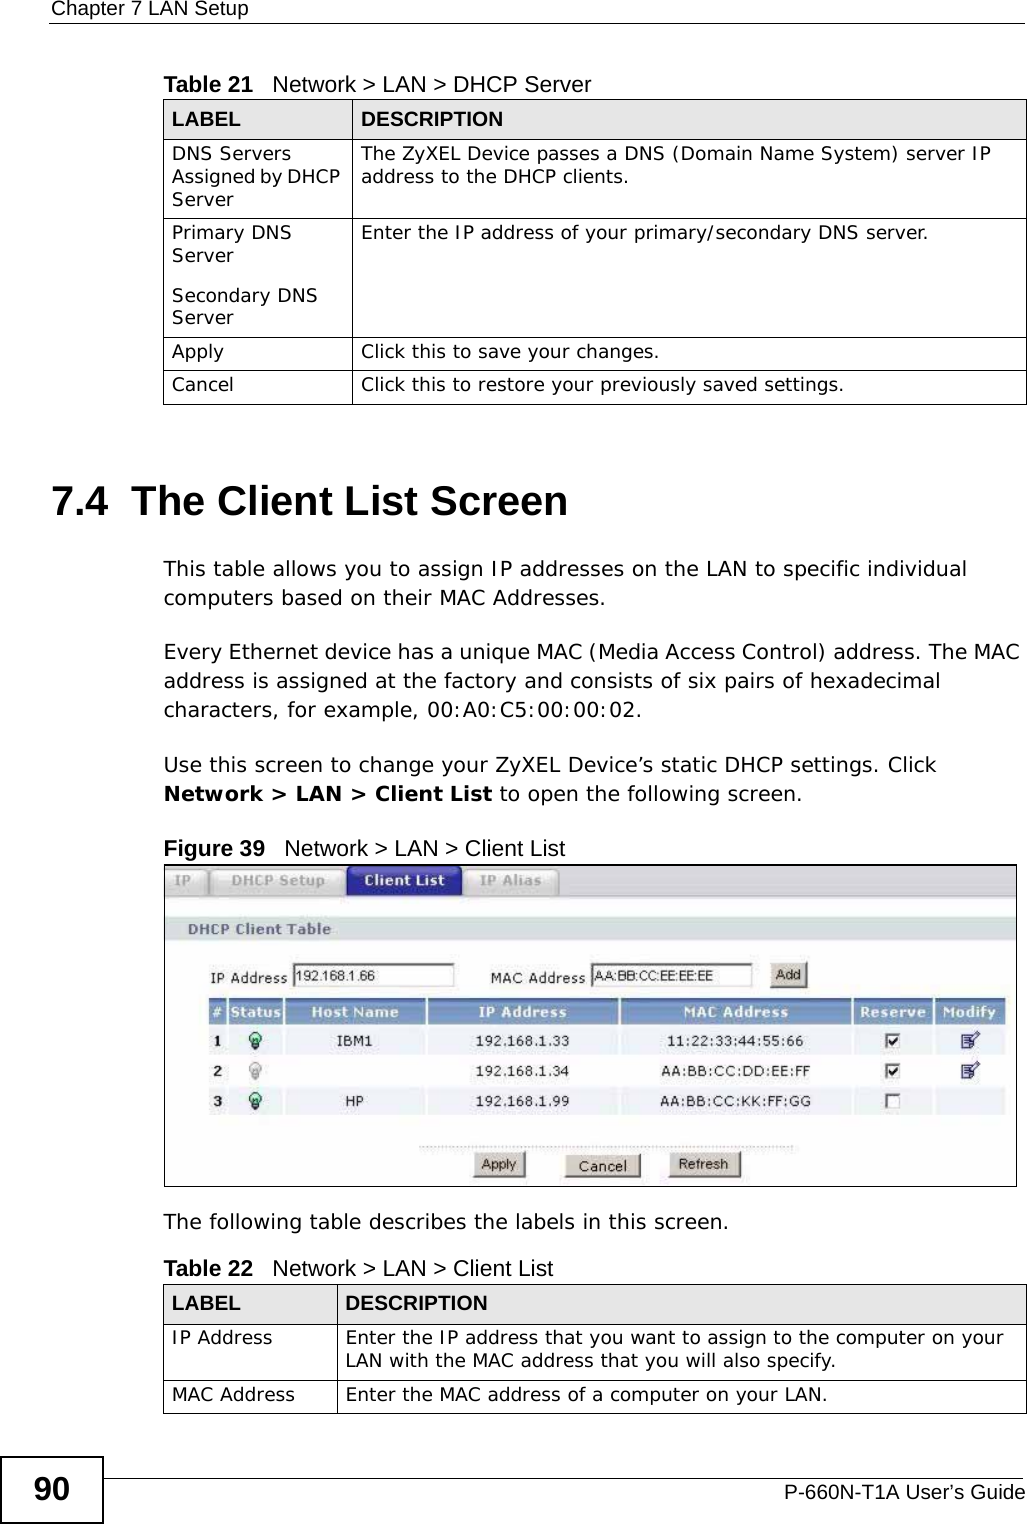 Chapter 7 LAN SetupP-660N-T1A User’s Guide907.4  The Client List ScreenThis table allows you to assign IP addresses on the LAN to specific individual computers based on their MAC Addresses. Every Ethernet device has a unique MAC (Media Access Control) address. The MAC address is assigned at the factory and consists of six pairs of hexadecimal characters, for example, 00:A0:C5:00:00:02.Use this screen to change your ZyXEL Device’s static DHCP settings. Click Network &gt; LAN &gt; Client List to open the following screen.Figure 39   Network &gt; LAN &gt; Client List The following table describes the labels in this screen.DNS Servers Assigned by DHCP ServerThe ZyXEL Device passes a DNS (Domain Name System) server IP address to the DHCP clients. Primary DNS ServerSecondary DNS ServerEnter the IP address of your primary/secondary DNS server.Apply Click this to save your changes.Cancel Click this to restore your previously saved settings.Table 21   Network &gt; LAN &gt; DHCP ServerLABEL DESCRIPTIONTable 22   Network &gt; LAN &gt; Client ListLABEL DESCRIPTIONIP Address Enter the IP address that you want to assign to the computer on your LAN with the MAC address that you will also specify.MAC Address Enter the MAC address of a computer on your LAN.